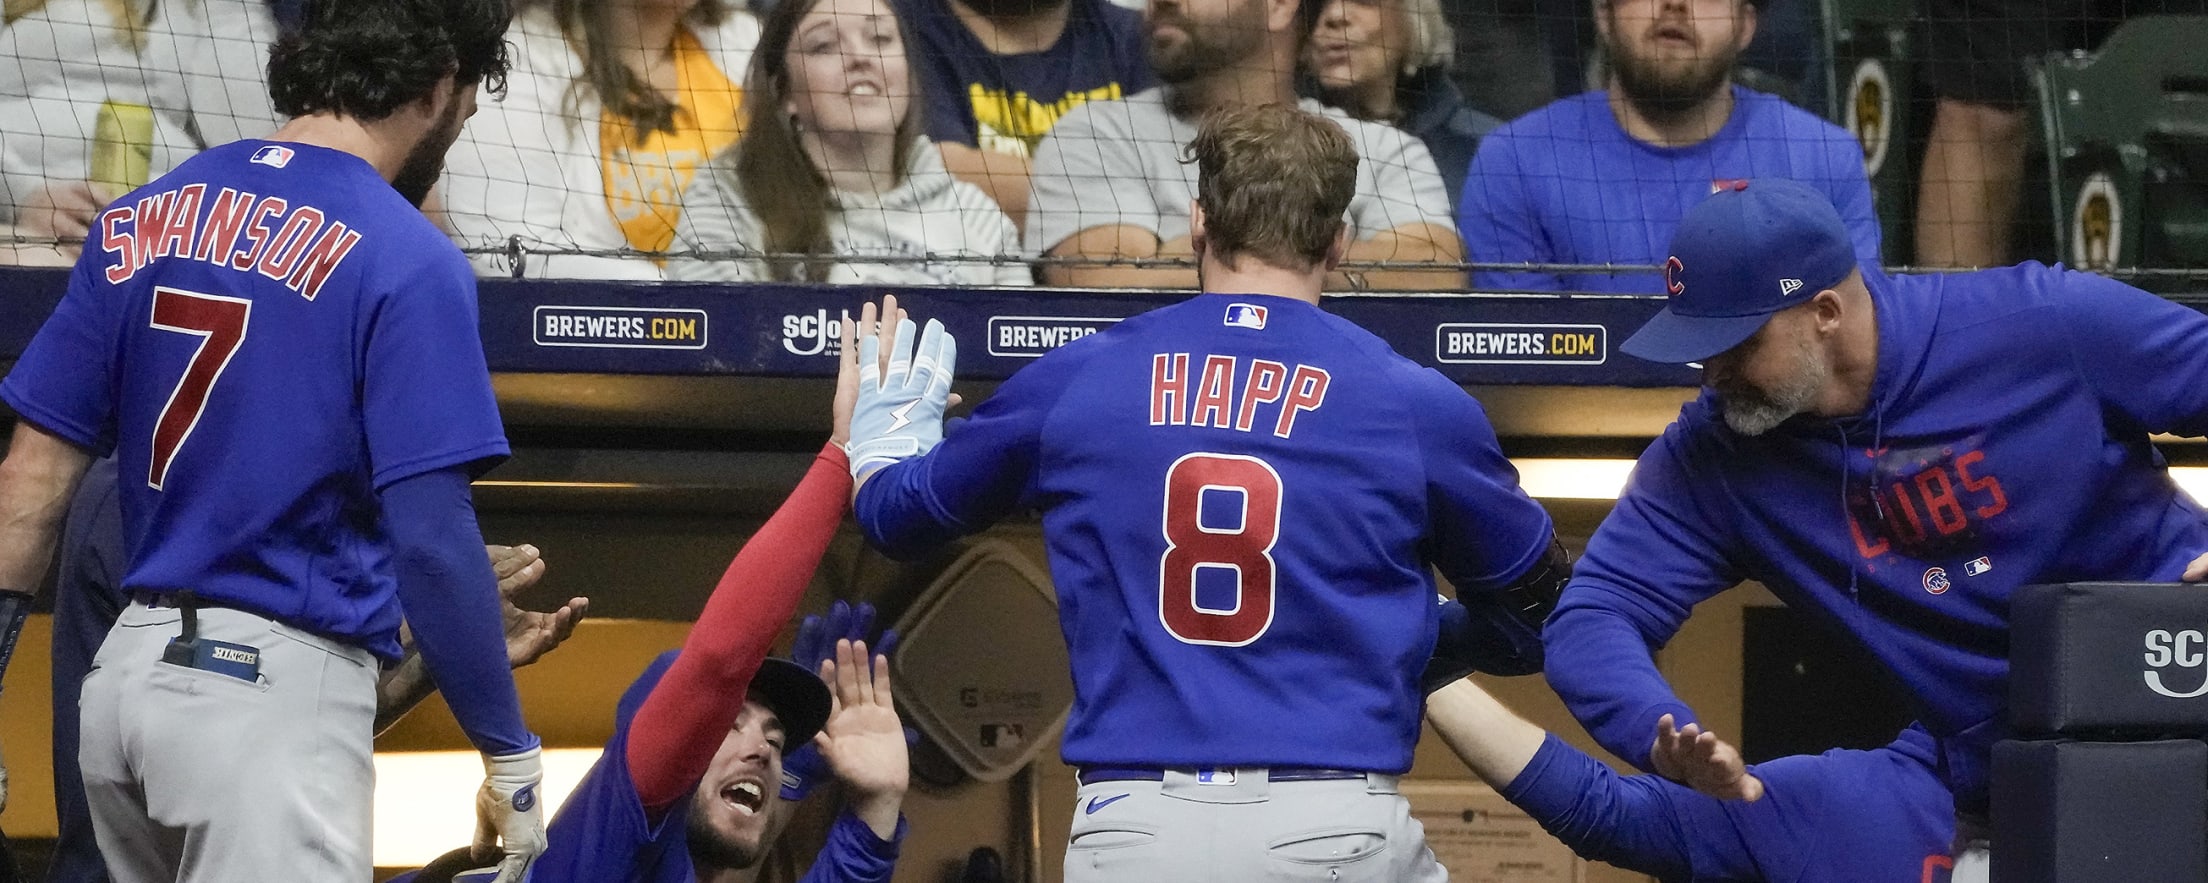 Chicago Cubs on X: Thank you, #Cubs fans! We've set another